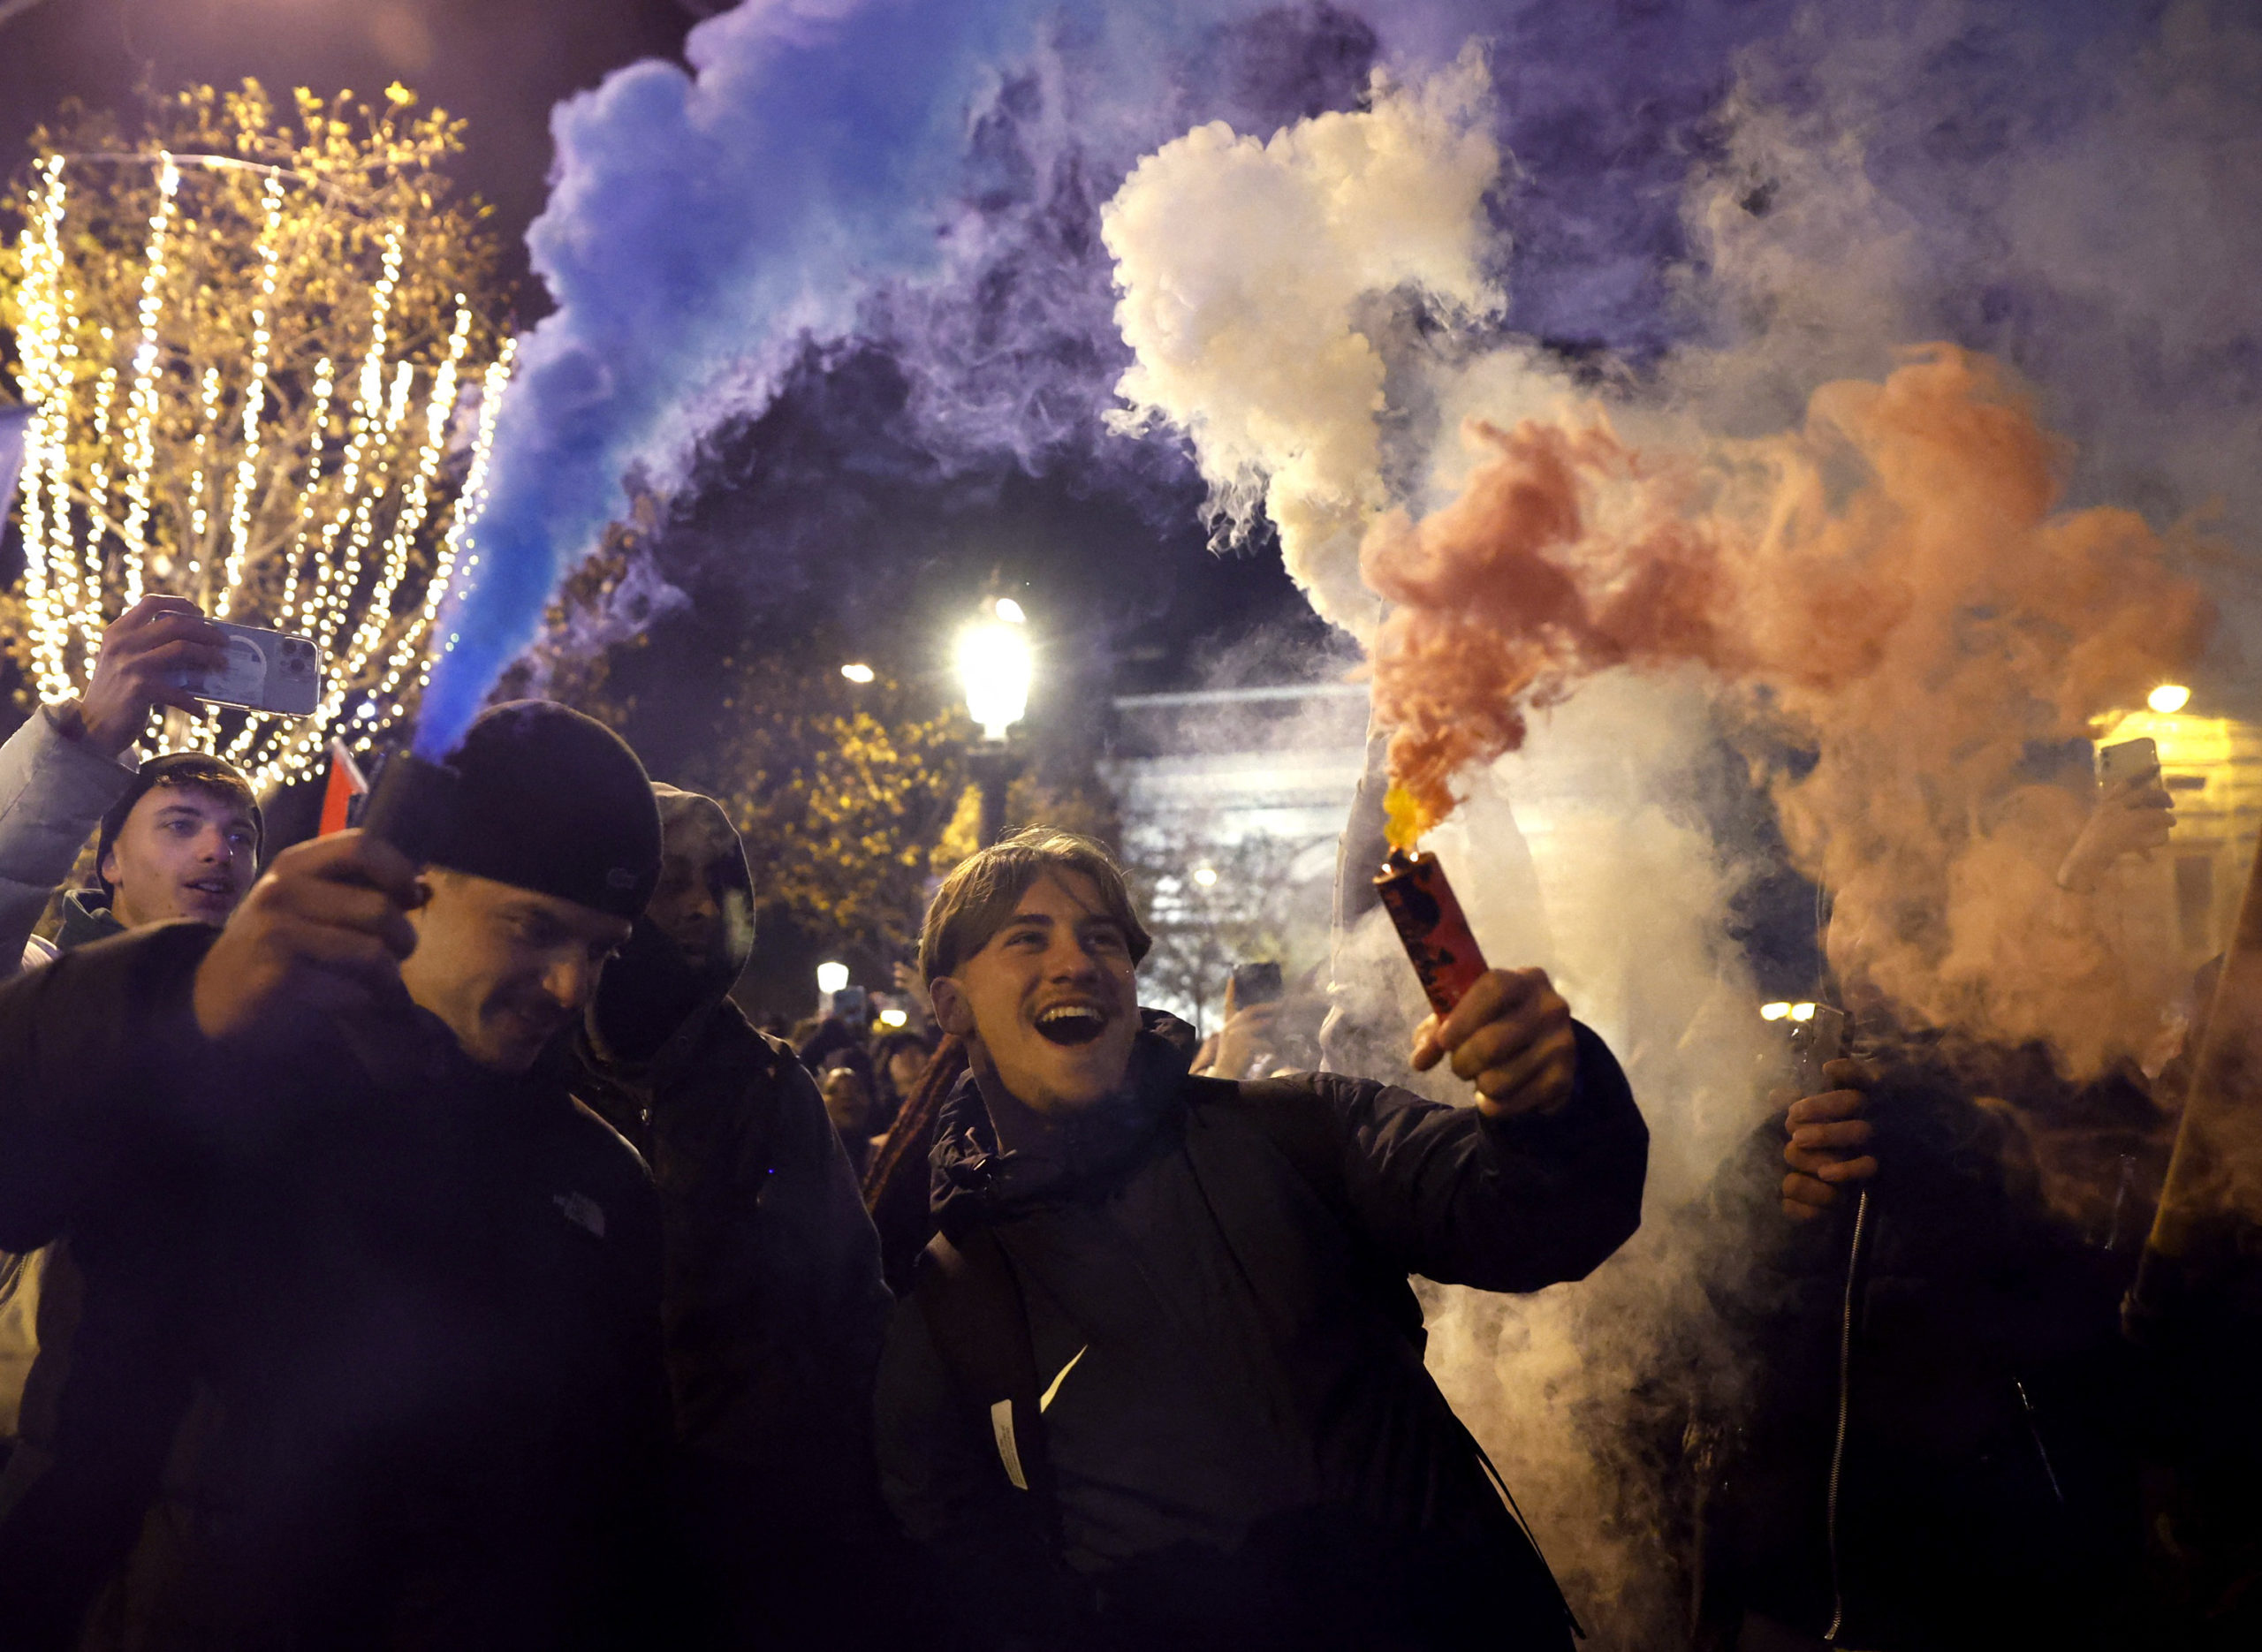 Soccer Football - FIFA World Cup Qatar 2022 - Fans gather in Paris for France v Morocco - Paris, France - December 14, 2022 France fans celebrate with flares on the Champs-Elysees after the match as France progress to the final